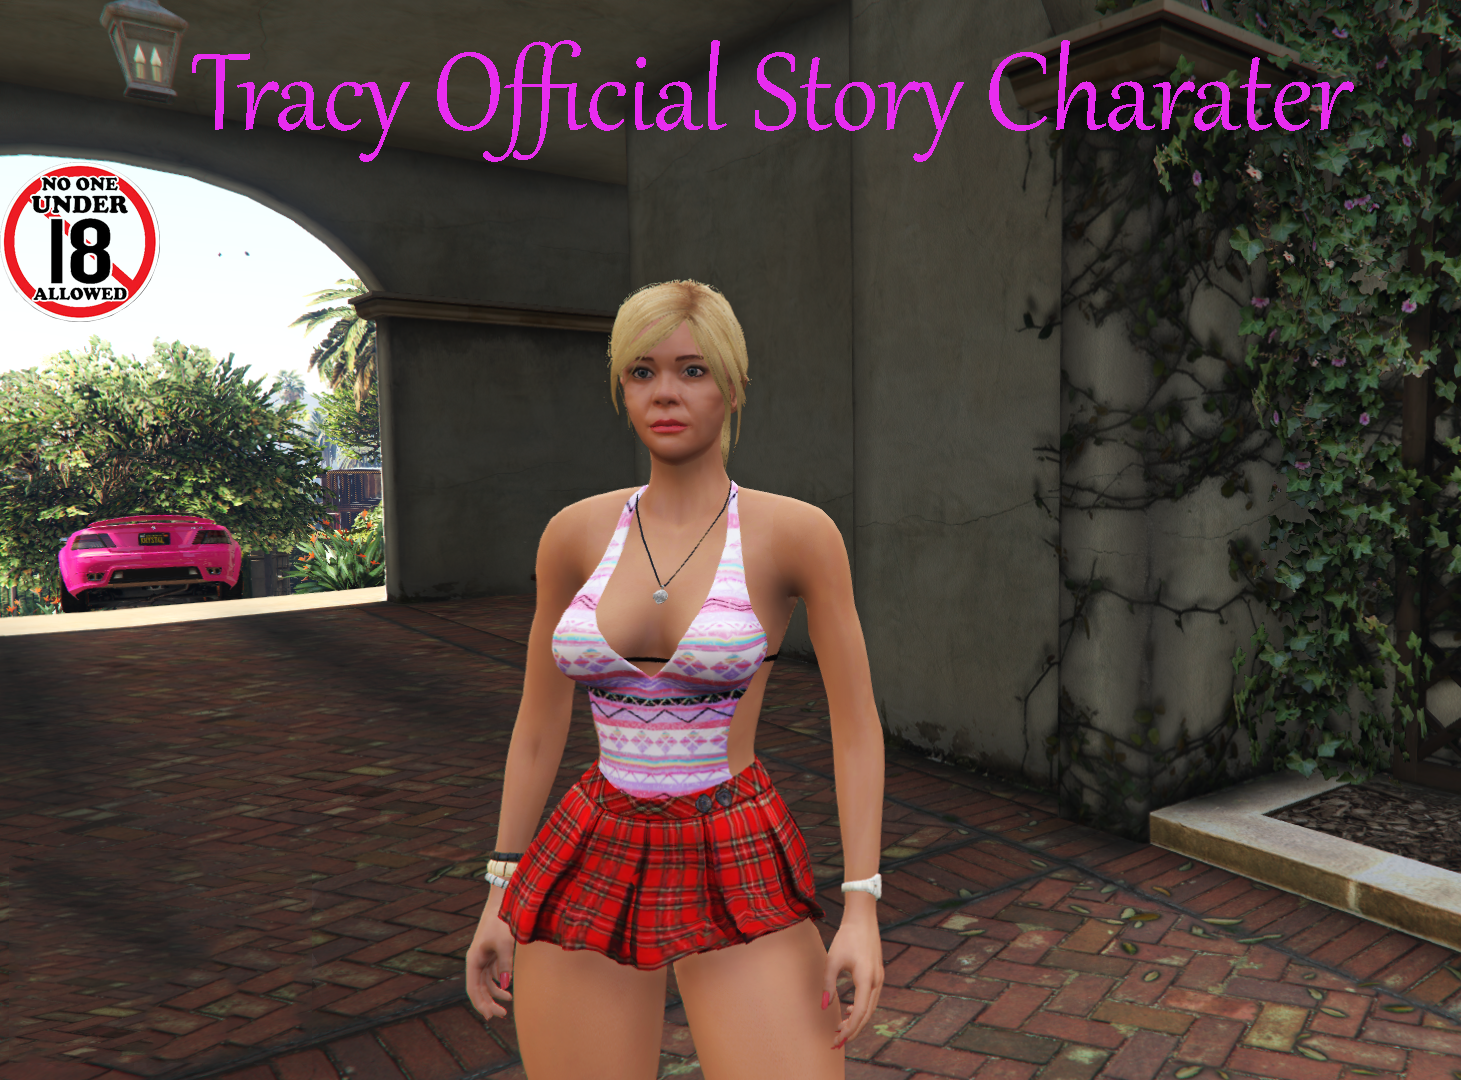 Tracy Official Story Charater Gta Mods Com